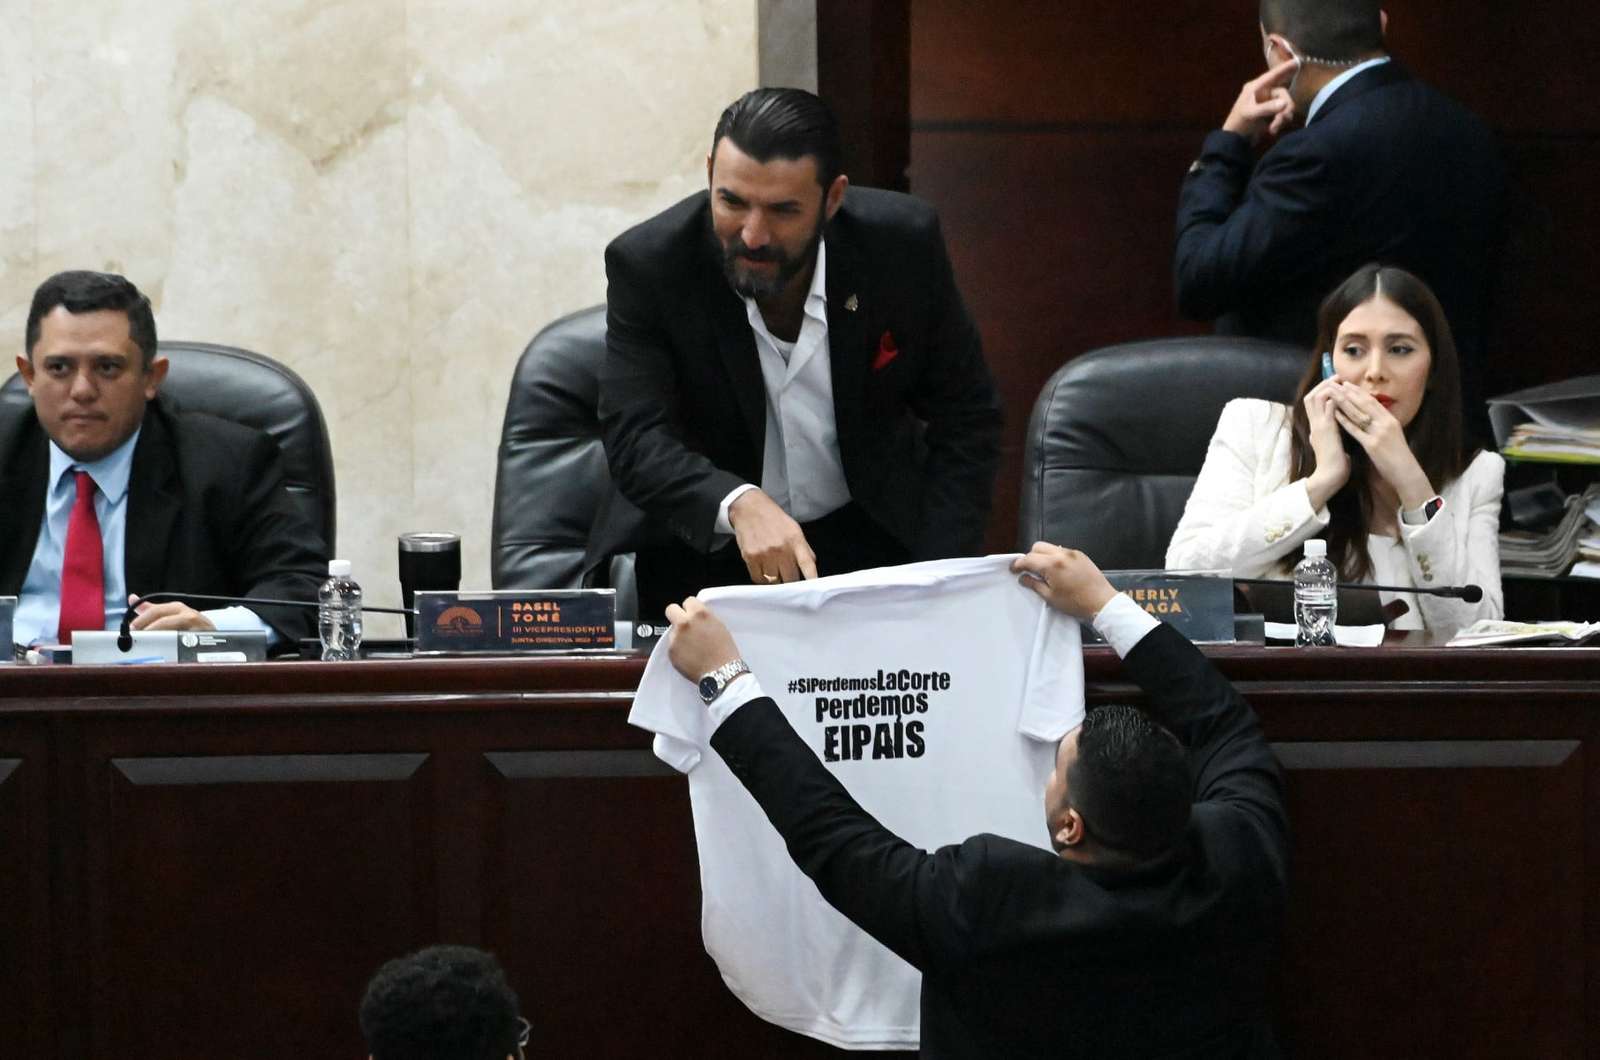 The Vice-President of the Congress, Rassel Tome, of the ruling Liberty and Refoundation (LIBRE) party, receives from a deputy of the opposition National Party, a jersey reading "If we Lose the Court, we Lose the Country" as the third attempt to elect the new judges of the Supreme Court of Justice fails, at the National Congress in Tegucigalpa, on February 11, 2023. - The Honduran Congress failed on its latest attempt to elect new Supreme Court justices due to a confrontation between deputies from the president's leftist party and the right-wing opposition. The 15 members of the highest court end their seven-year terms on February 11, but the vote to choose their successors --which began on the eve-- threatens to take several days, as both sides want the Court to respond to their interests, which is the tradition in Honduras. (Photo by Orlando SIERRA / AFP)